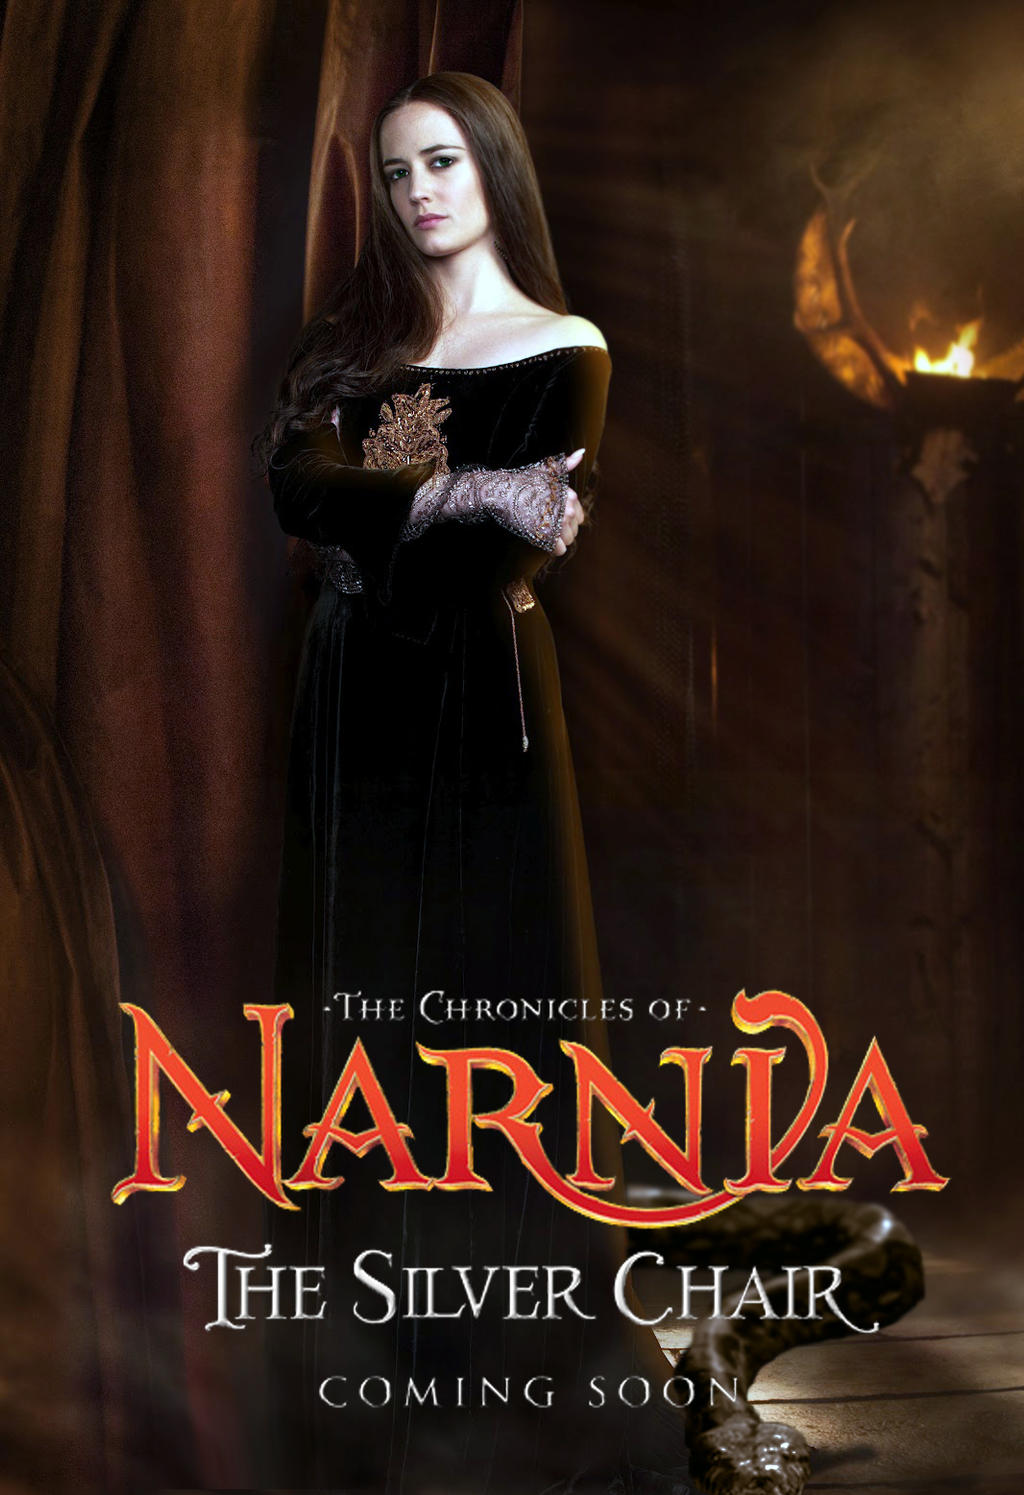 The Chronicles of Narnia: The Silver Chair by AmberPearce on DeviantArt